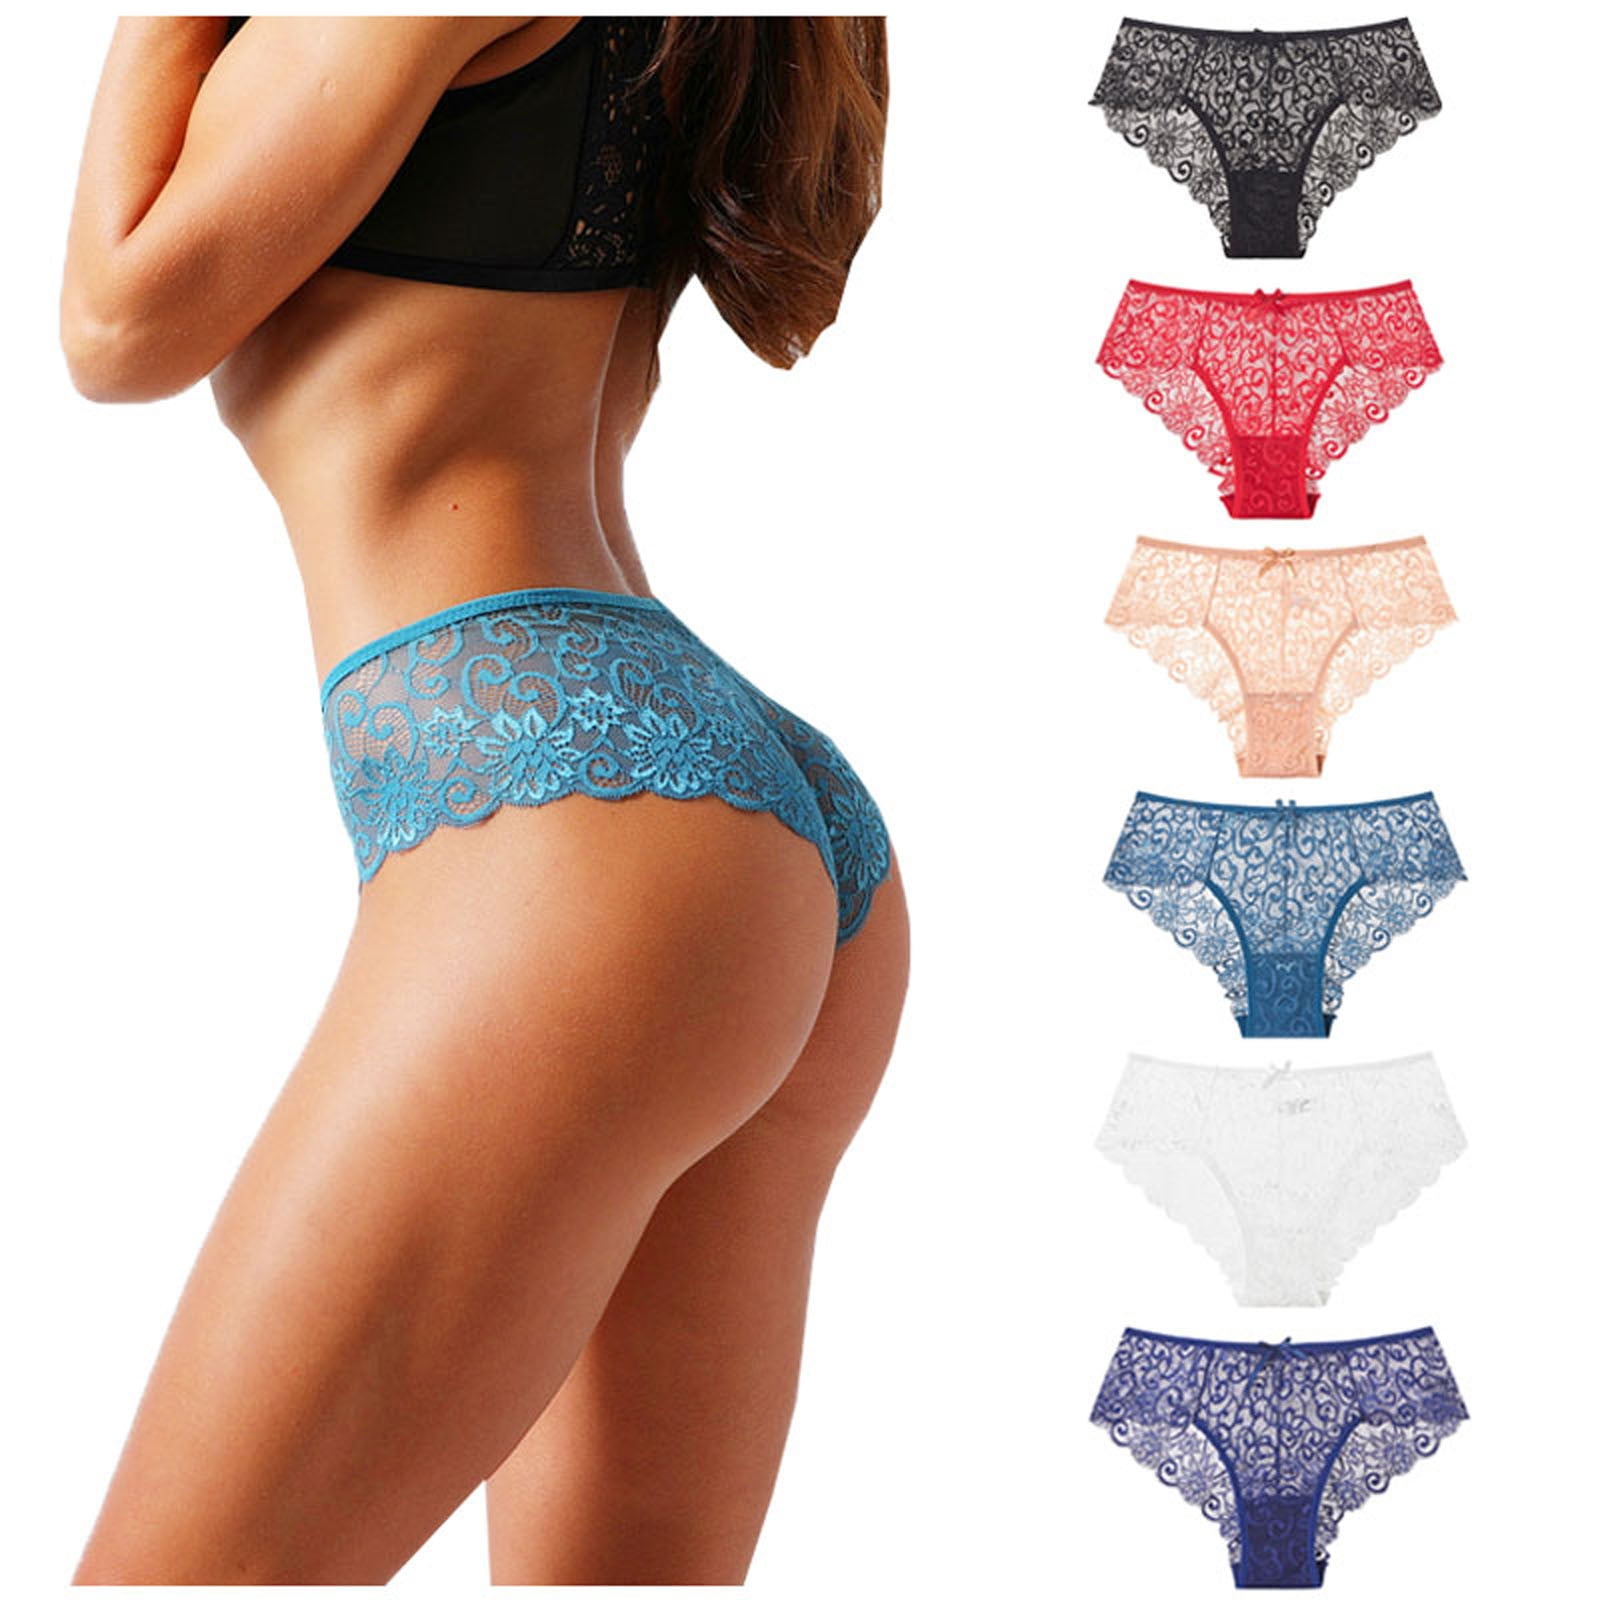 Leesechin Womens Underwear Control Briefs Sexy Underwear Lace Bikini Panties  Comfy Lace Briefs Pack Of 6 XL Deals of Today 